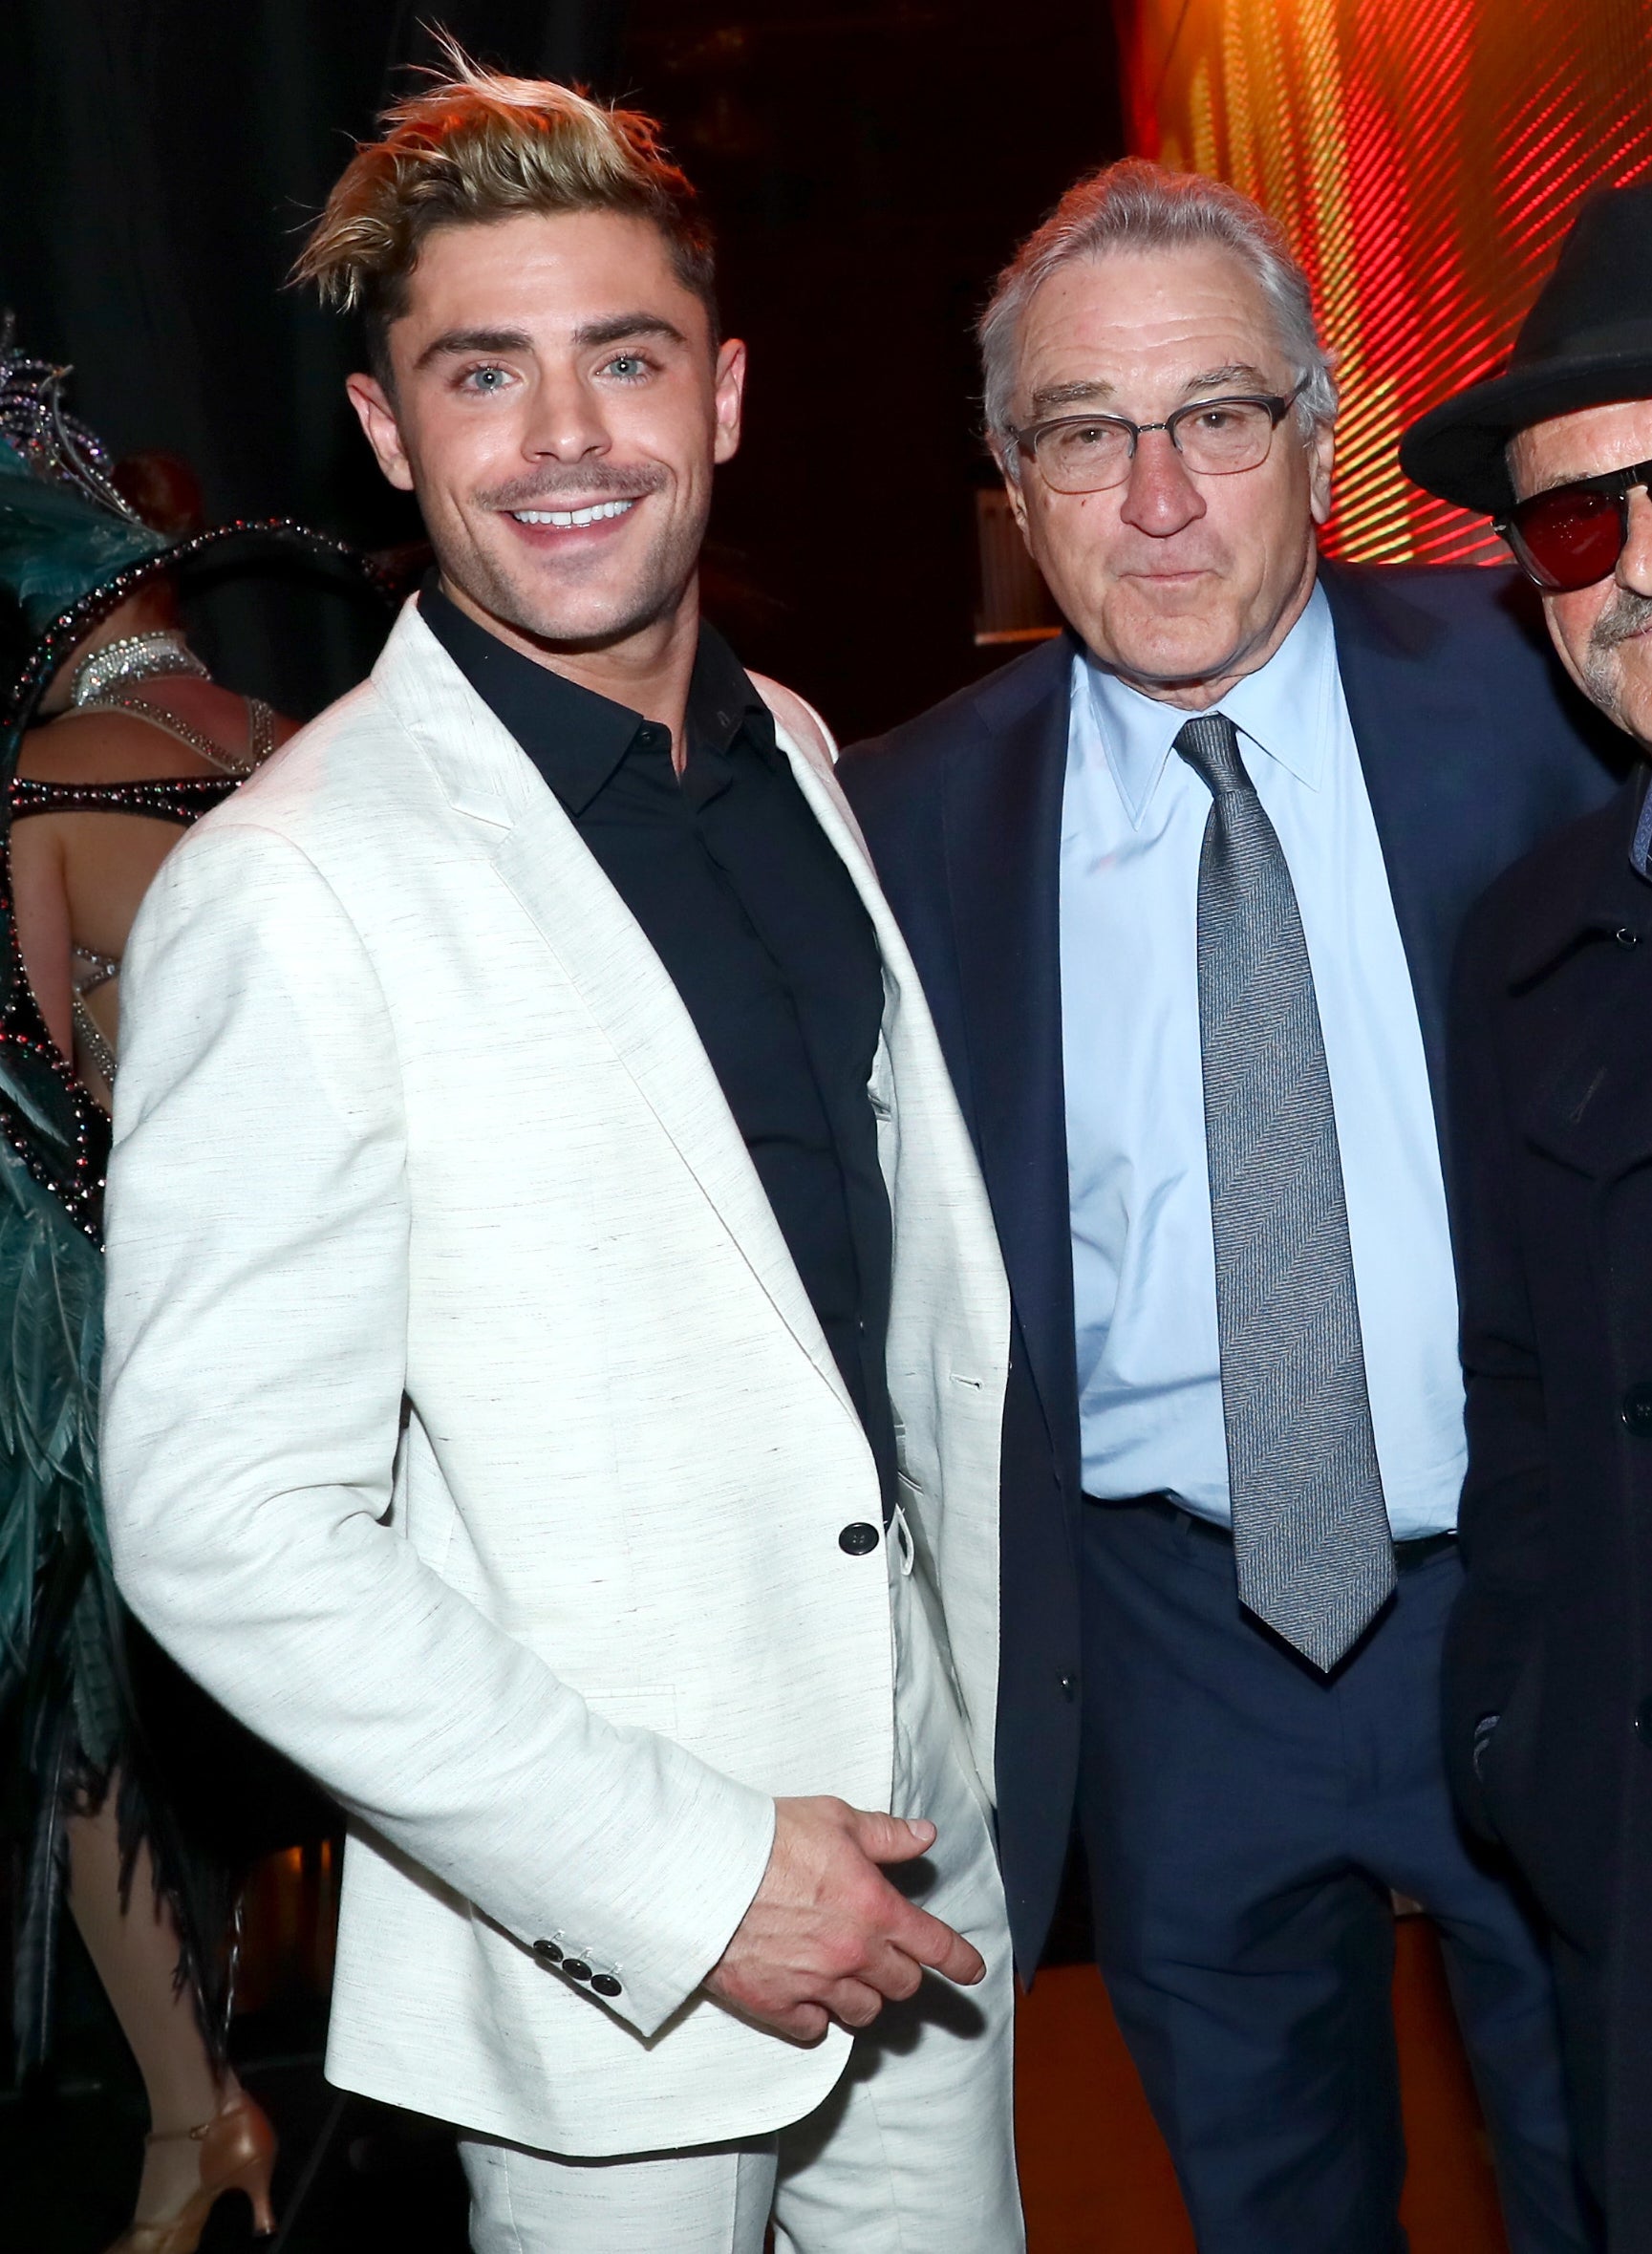 Zac and Bob on the red carpet